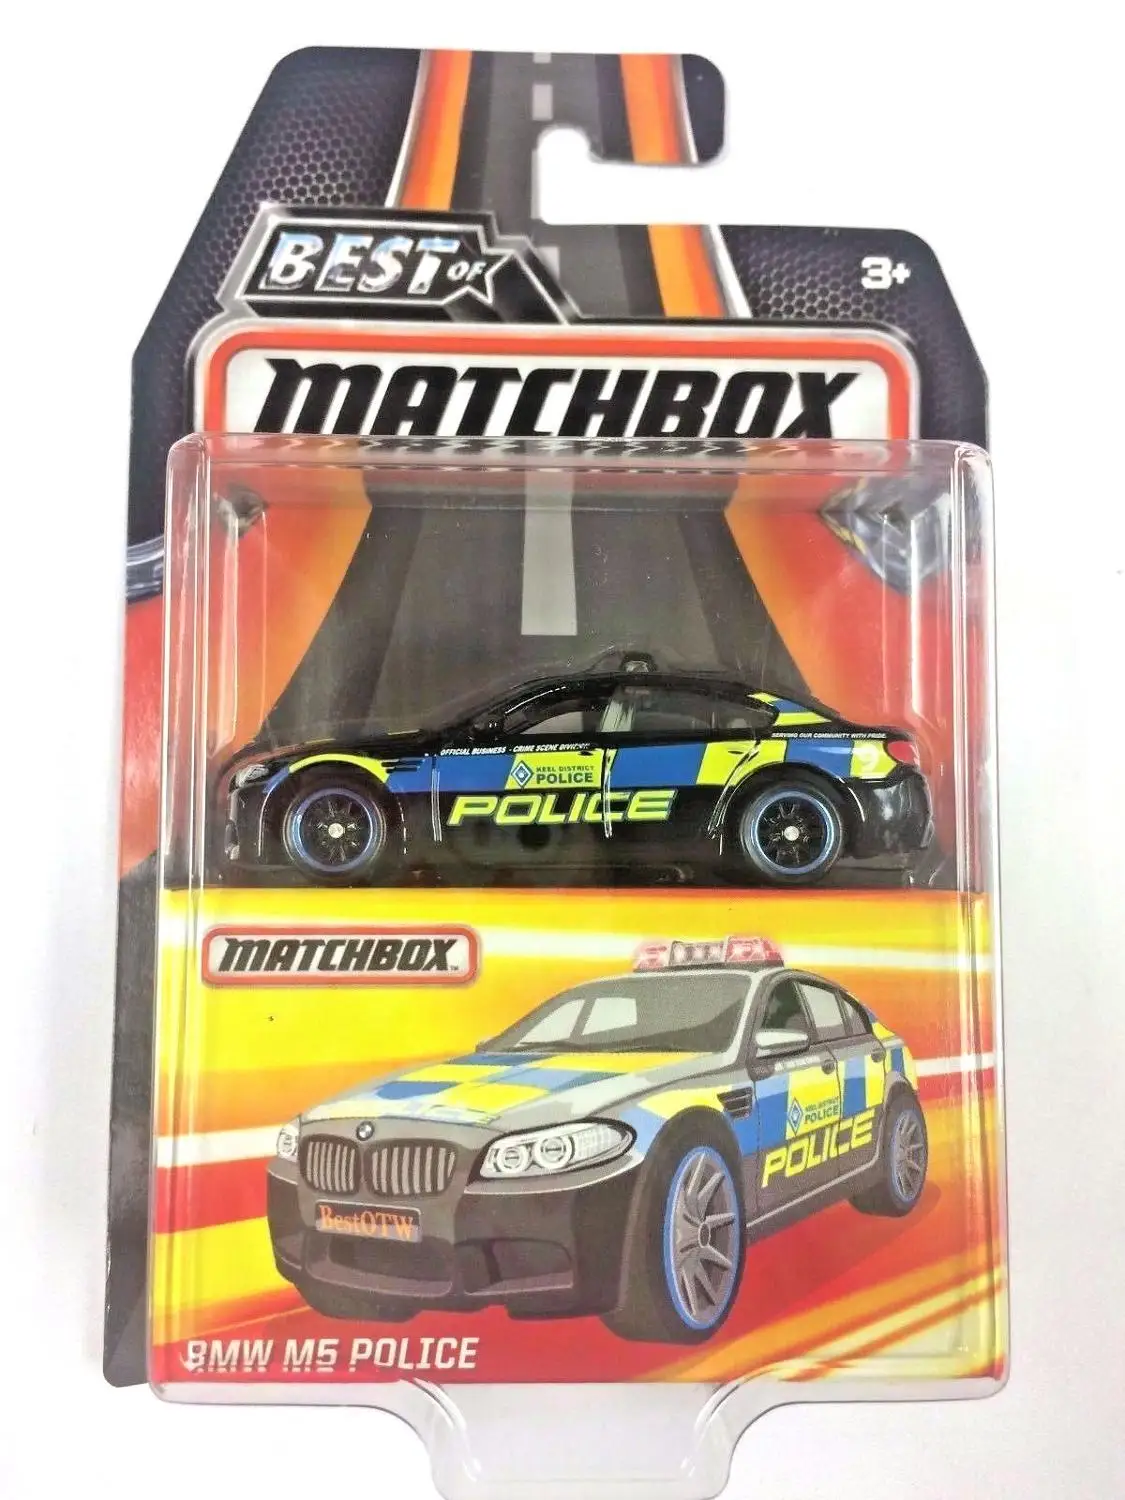 

2019 Matchbox Car 1:64 Sports Car M5 POLICE Collector Edition BEST OF Metal Diecast Model Car Kids Toys Gift